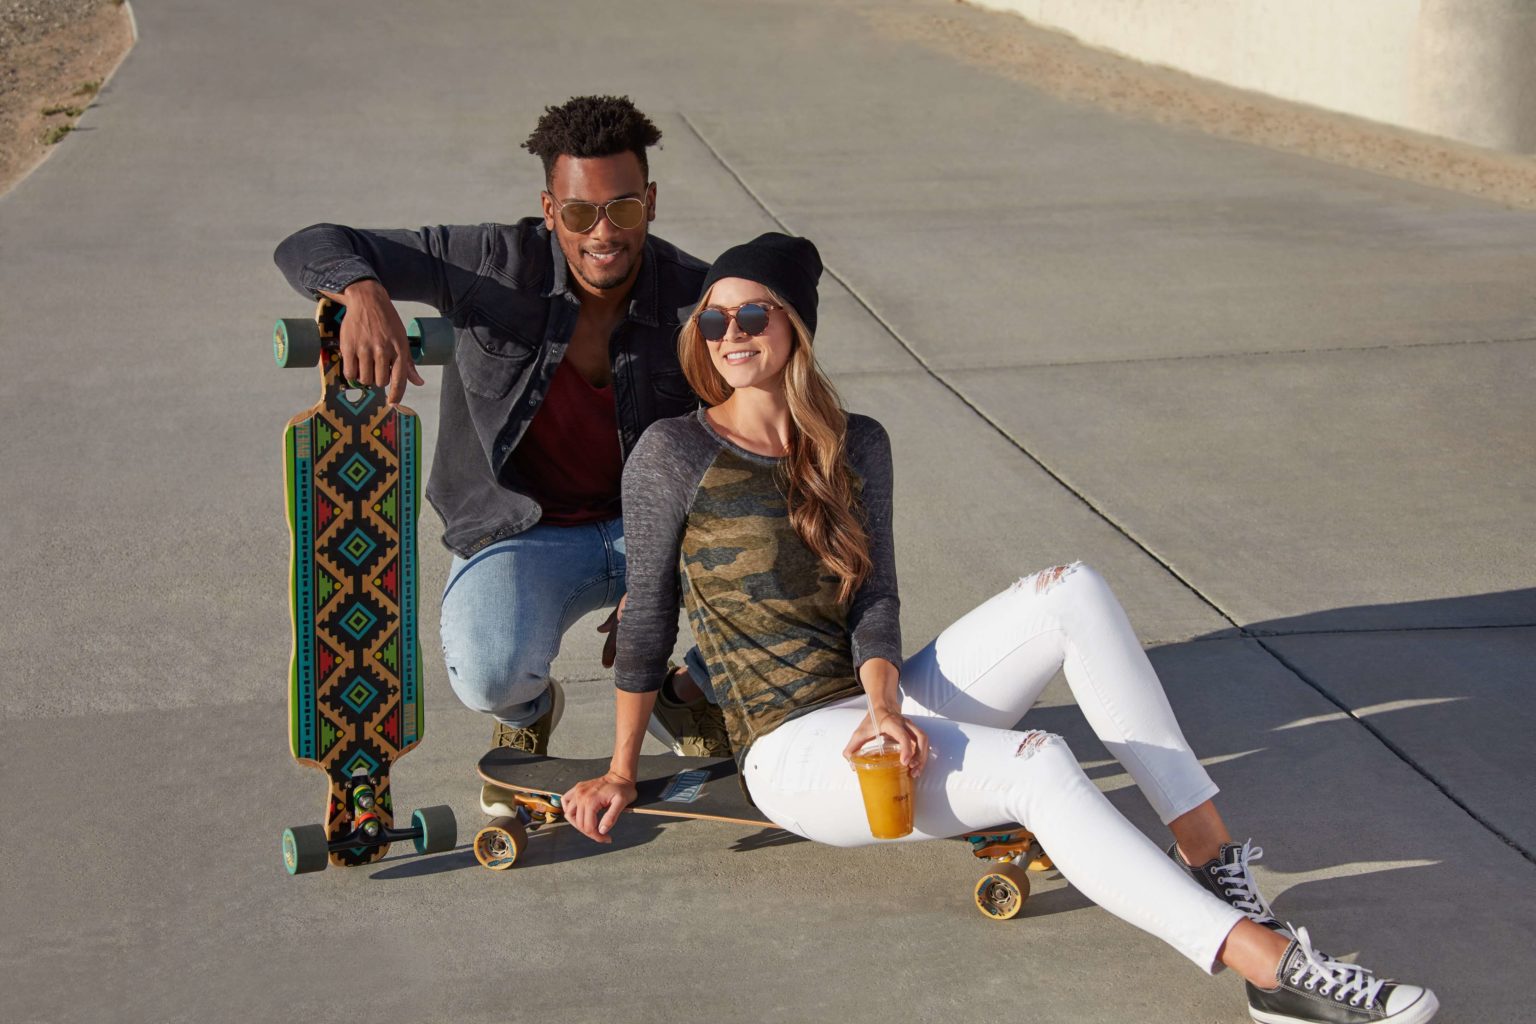 A guy and a girl with skate boards and a fruit juice in girl's hand given a phose for a look book